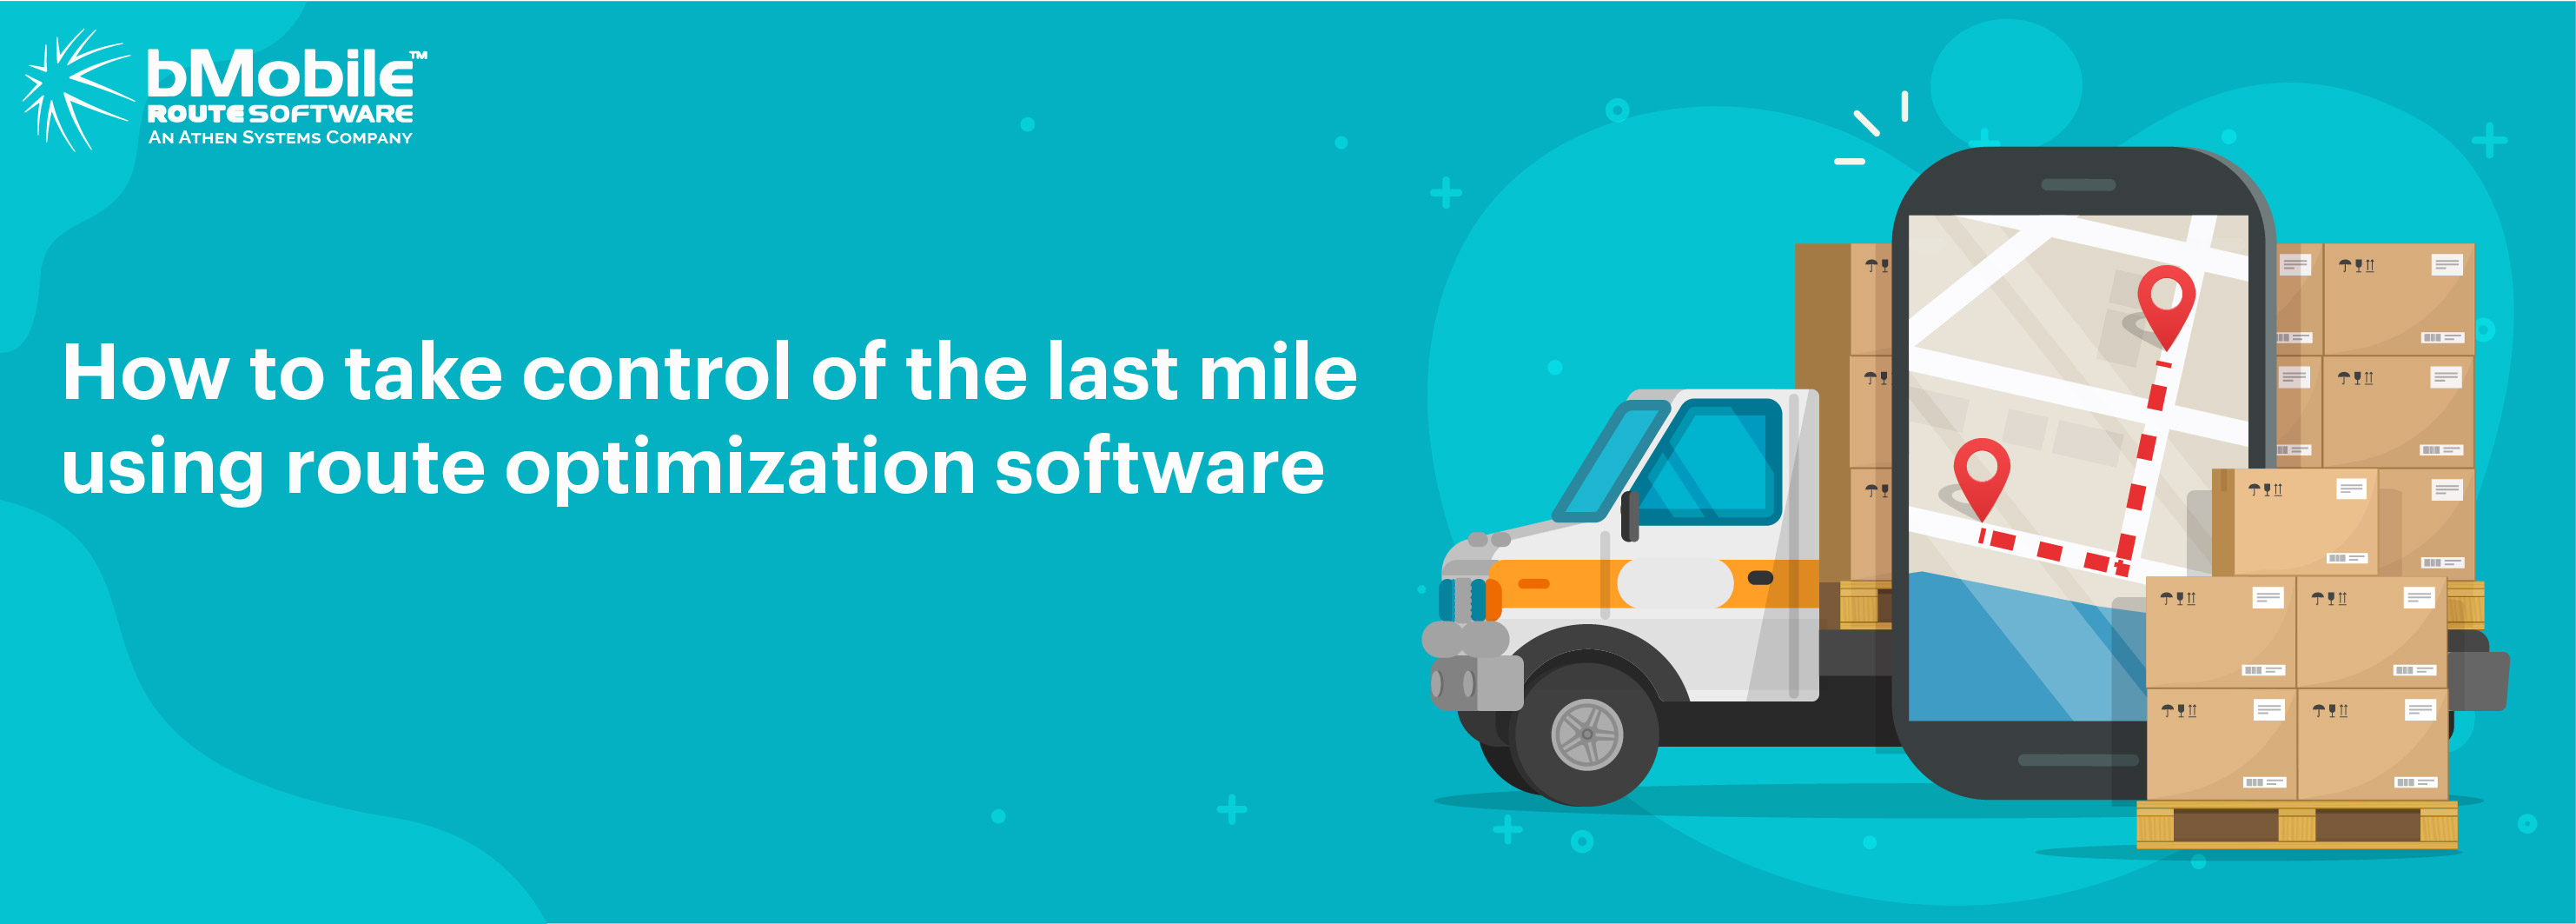 How to take control of the last mile using route optimization software